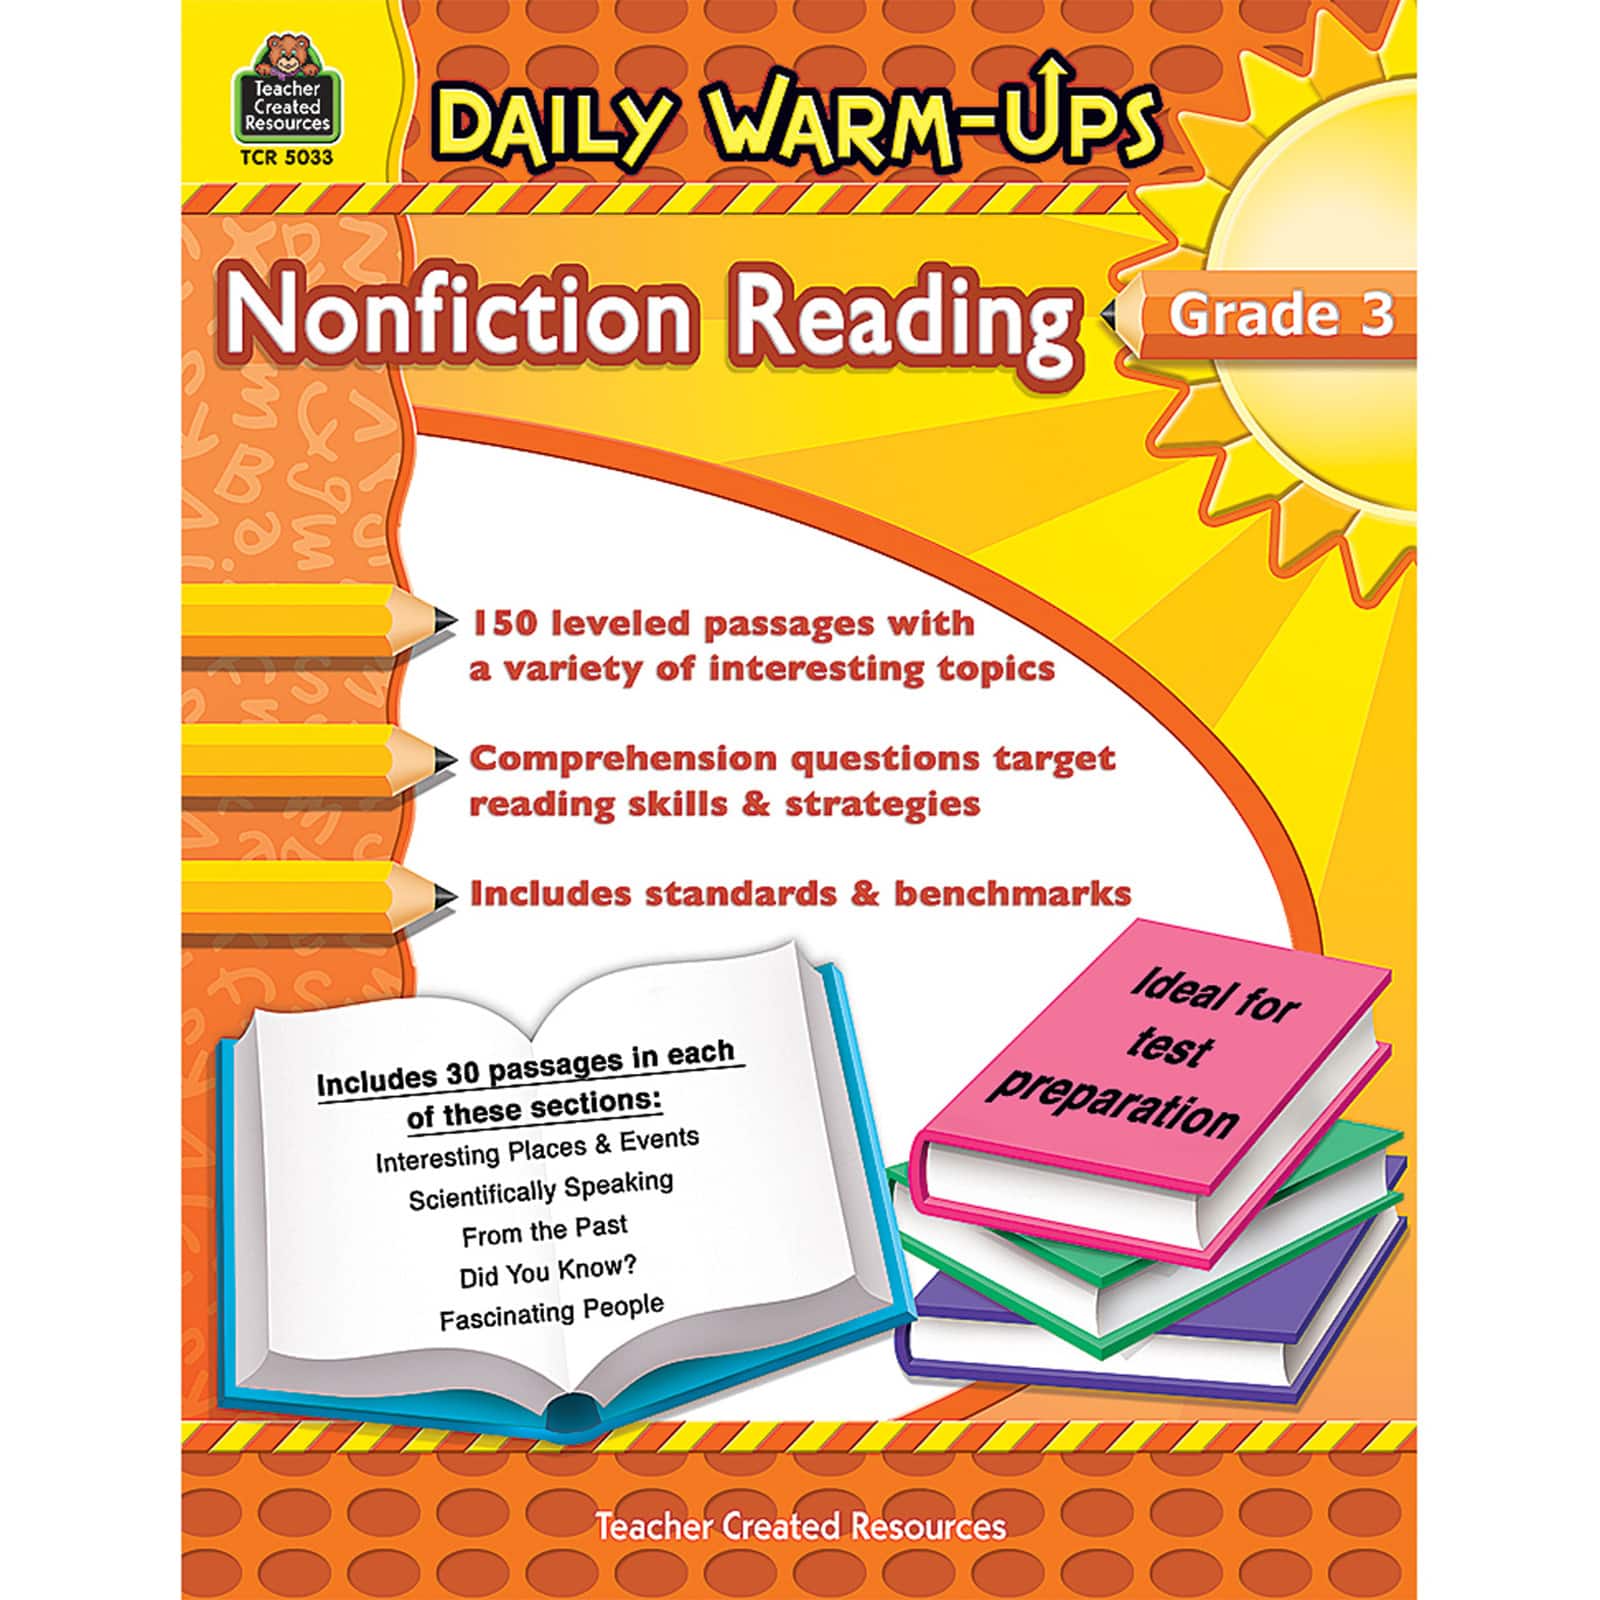 Teacher Created Resources Daily Warm-Ups: Nonfiction Reading Book, Grade 3